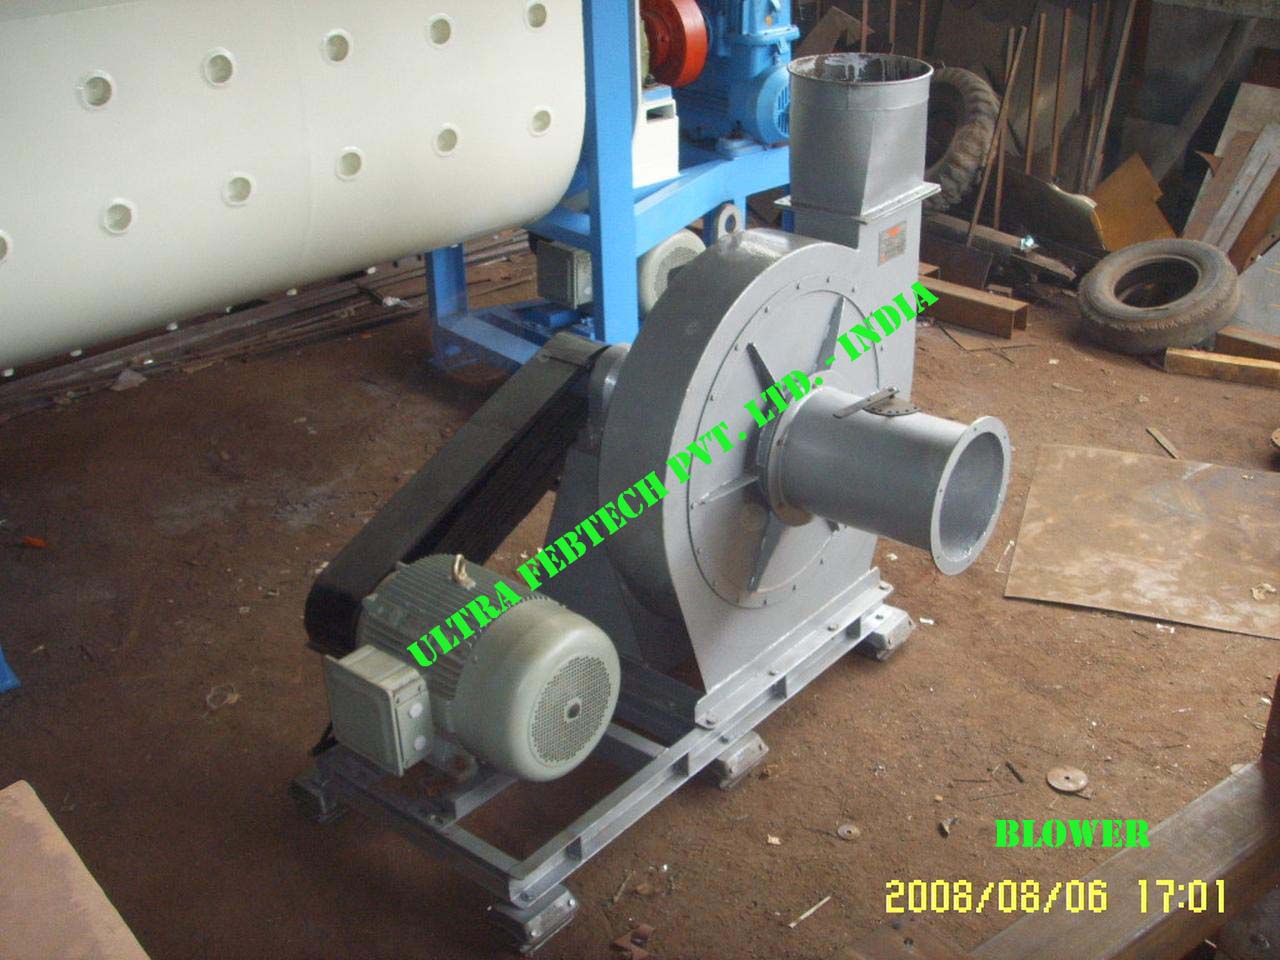 electric blowers